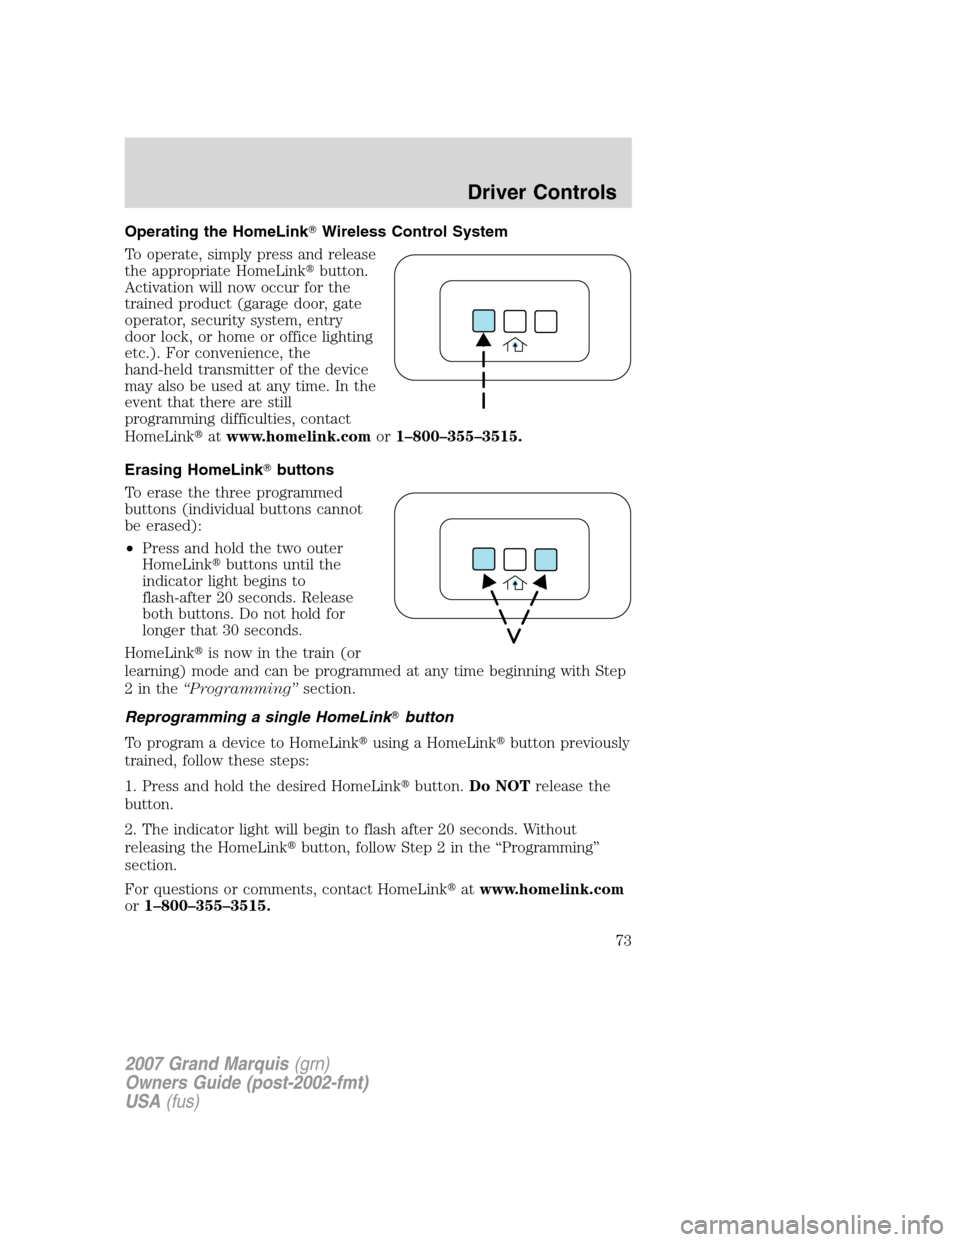 Mercury Grand Marquis 2007  s Manual PDF Operating the HomeLinkWireless Control System
To operate, simply press and release
the appropriate HomeLinkbutton.
Activation will now occur for the
trained product (garage door, gate
operator, secu